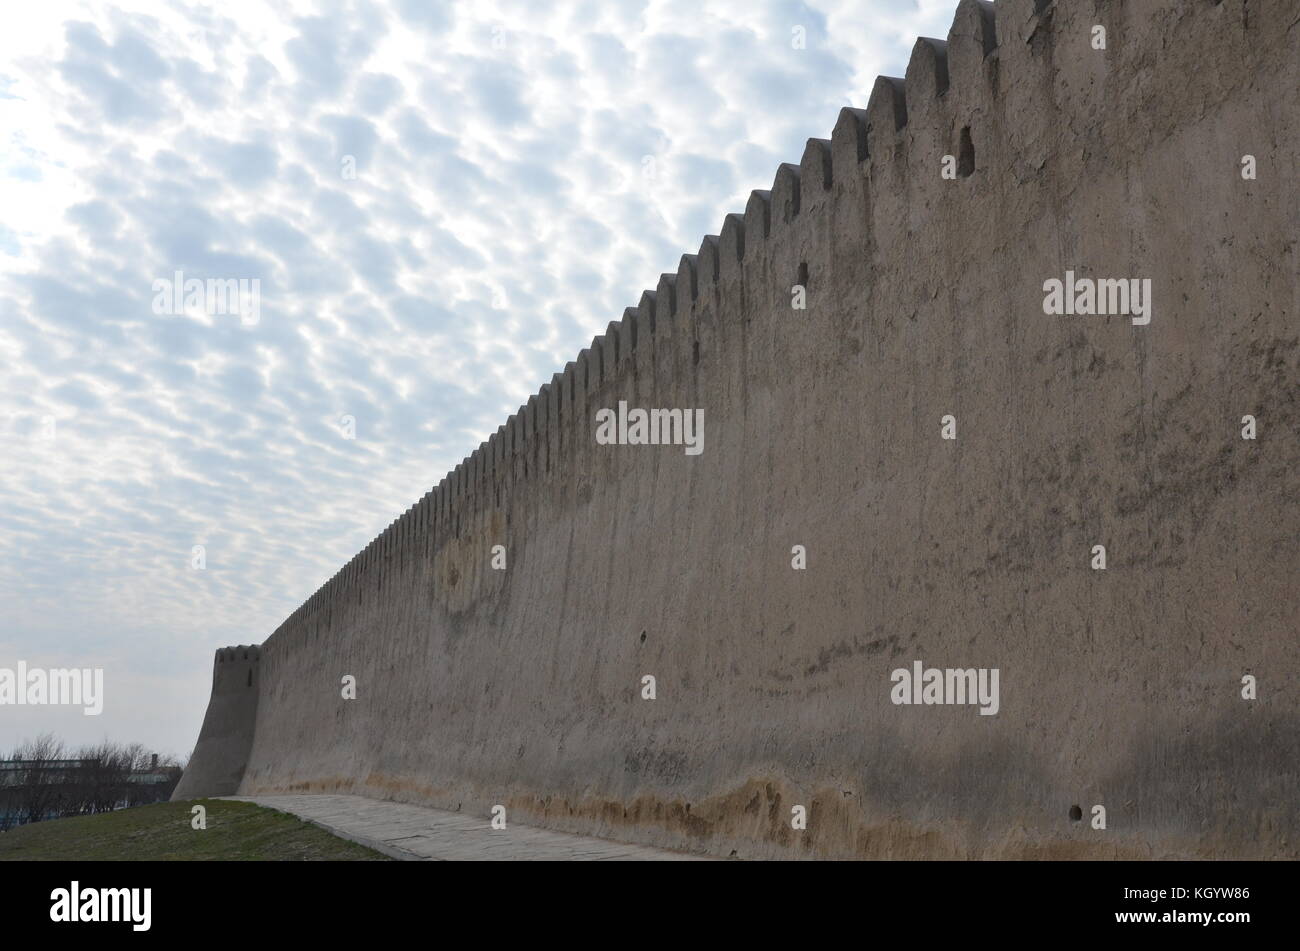 City wall, with water like clouds, of Turkestan, Turkistan, is an ancient city in Kazakhstan with archelogic record dating back to the 4th century. Stock Photo